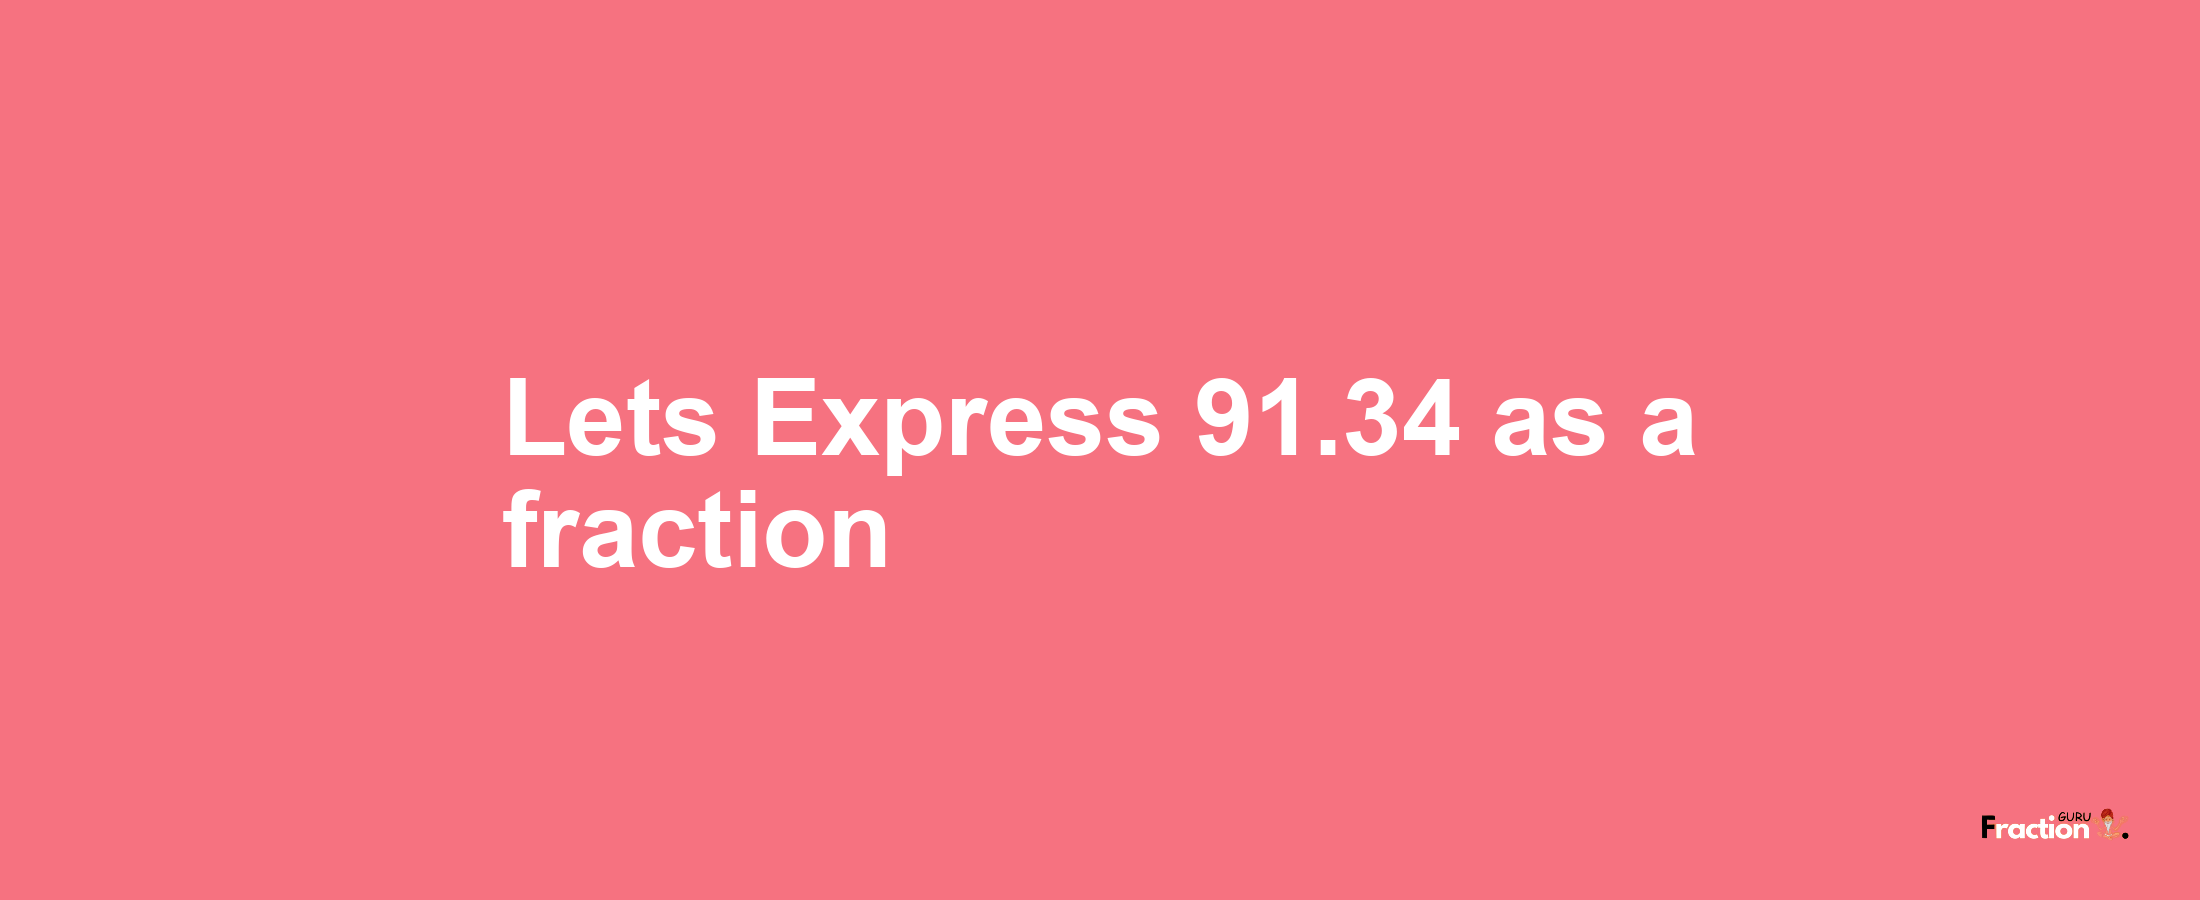 Lets Express 91.34 as afraction